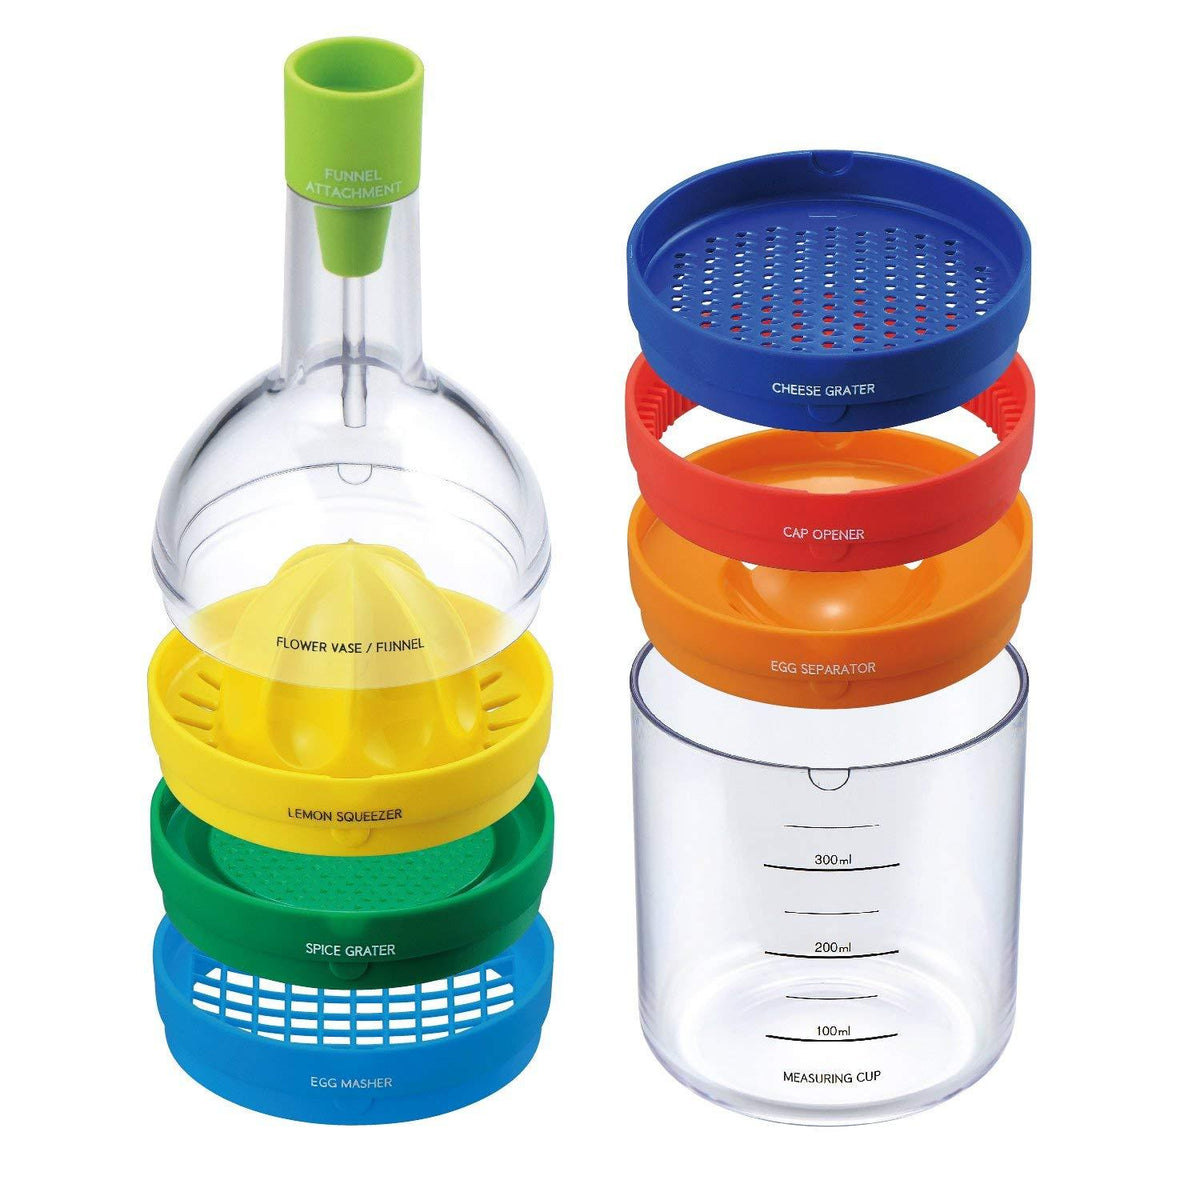 Kitchen Tool Bottle 8 in 1 Kitchen Tool Set - Funnel, Juicer Lemon  squeezer, Spice grater, Egg masher, Cheese grater, Egg seperator, Measuring  cup